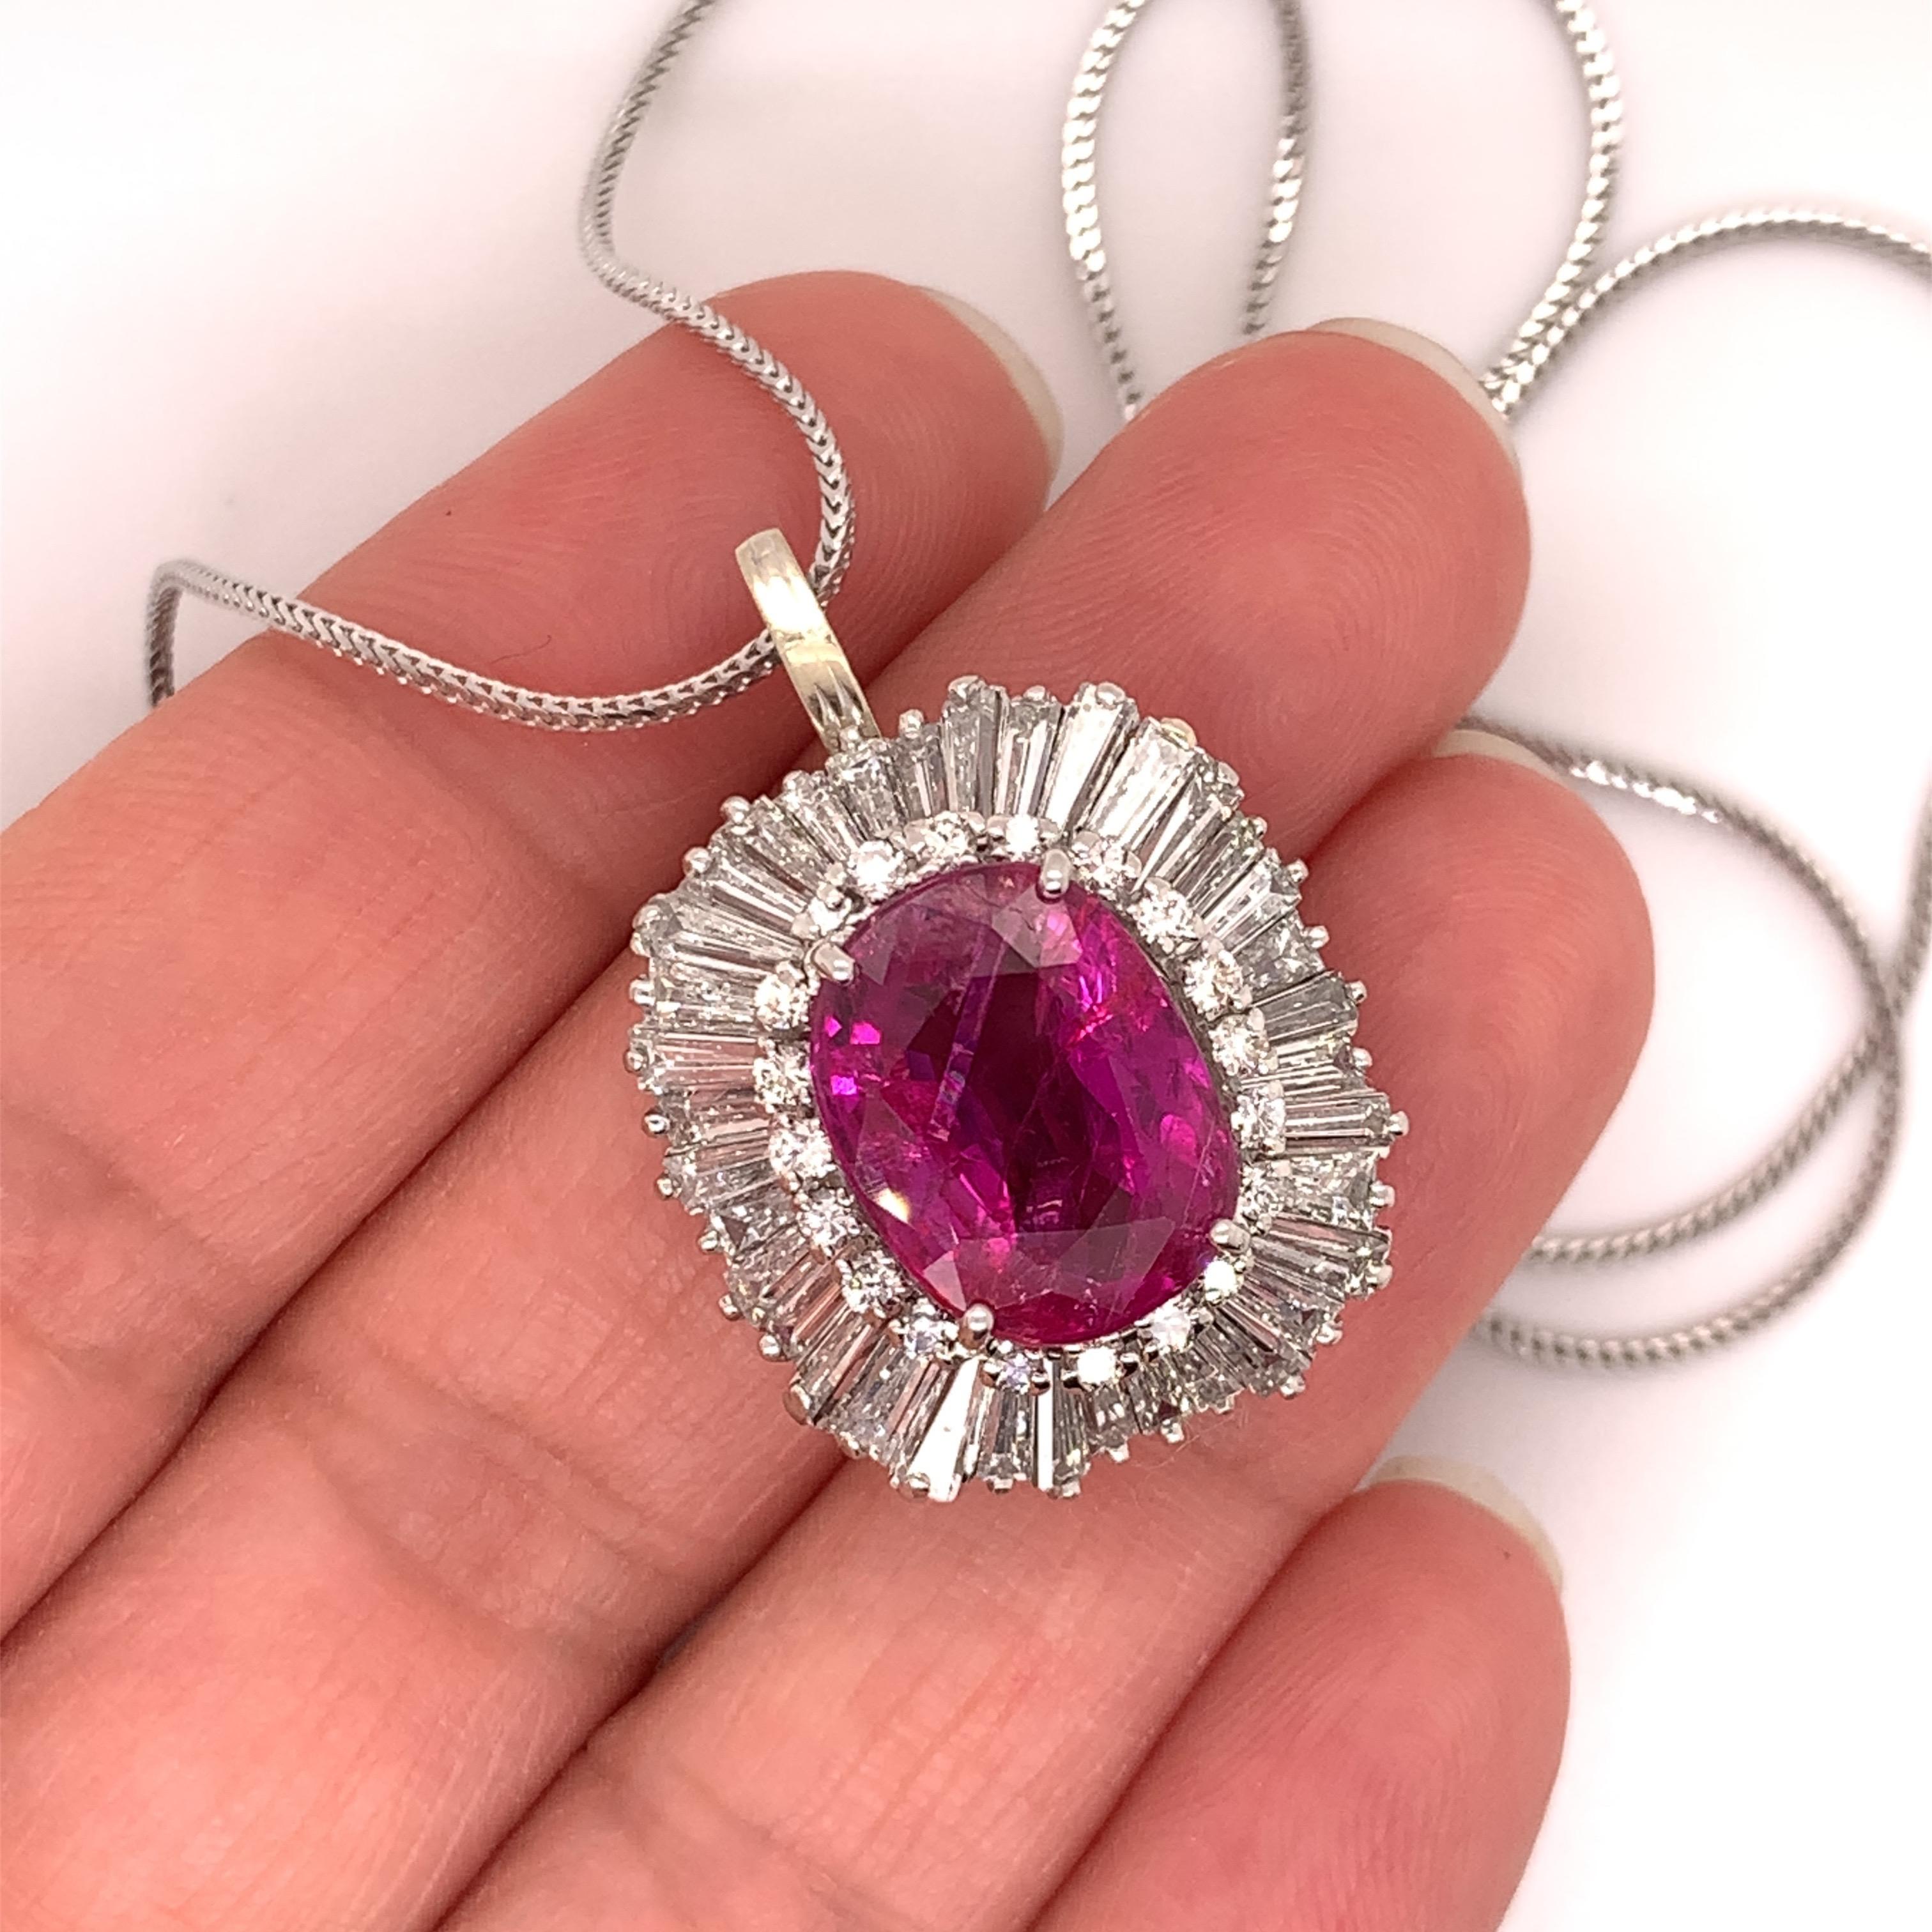 Women's or Men's GIA 7.47 Carat Unheated Ruby Pendant/Ring For Sale